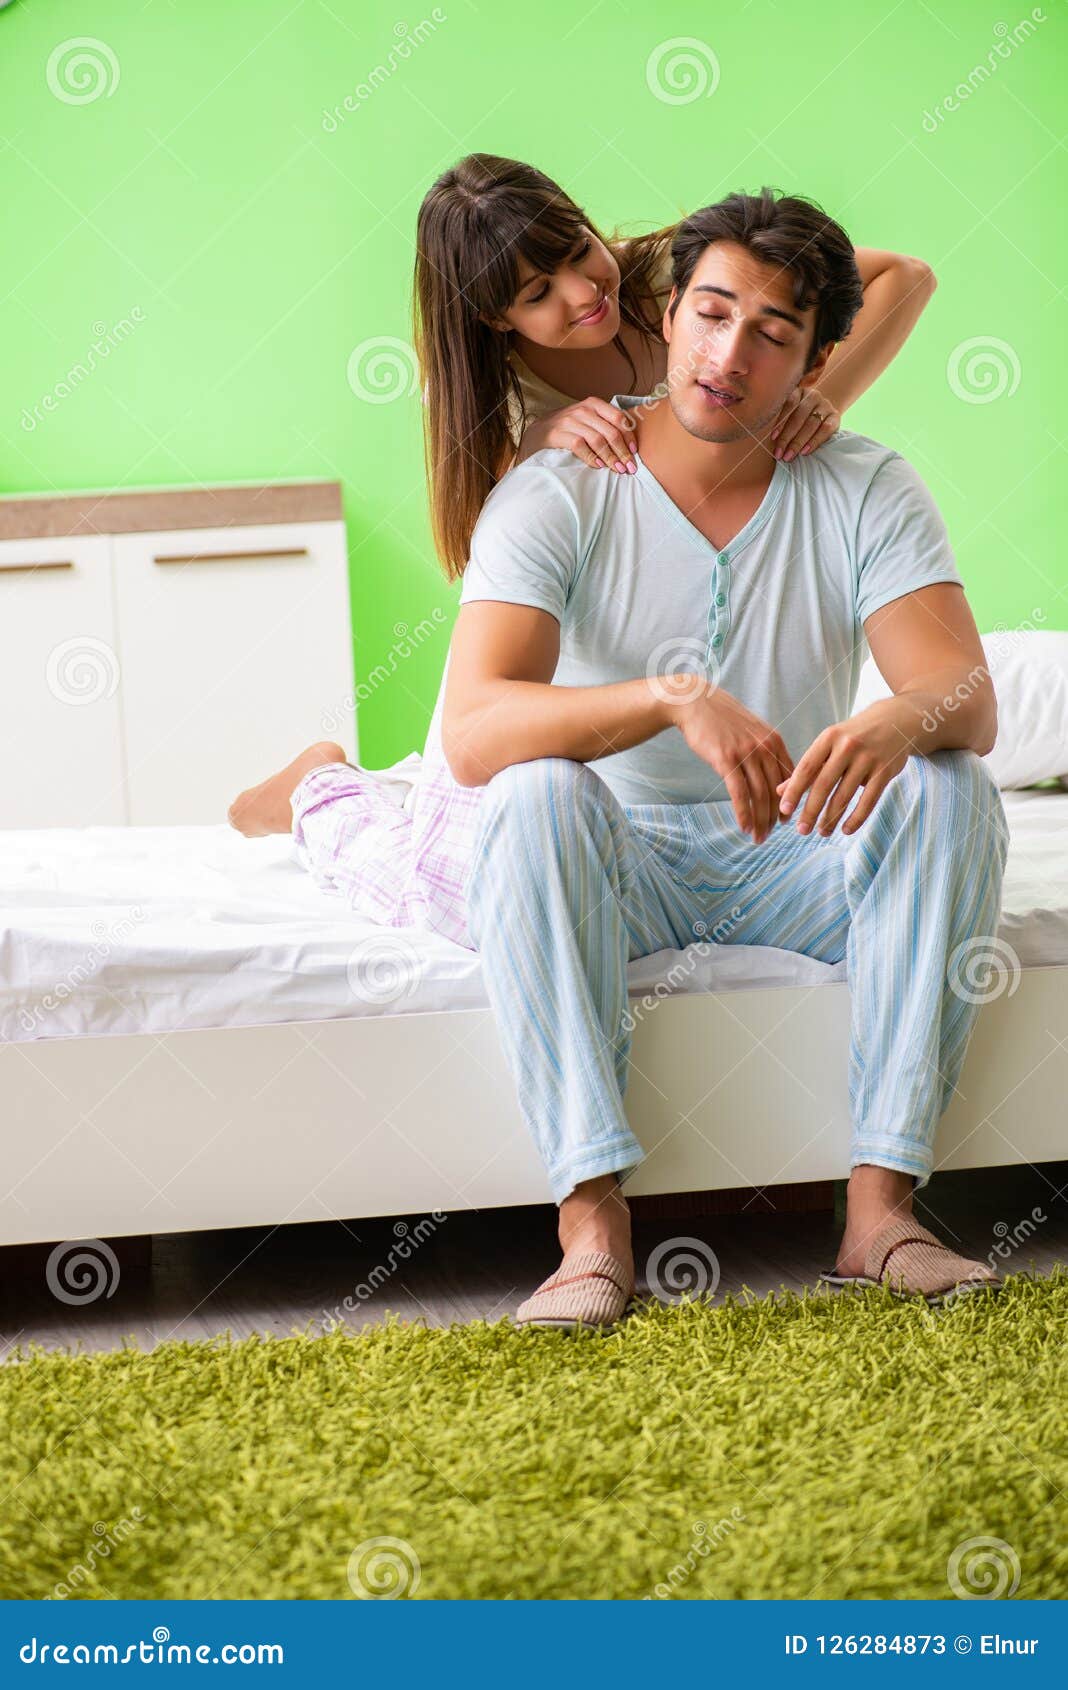 The Woman Doing Massage To Her Husband In Bedroom Stock Image Image Of Pleasure Love 126284873